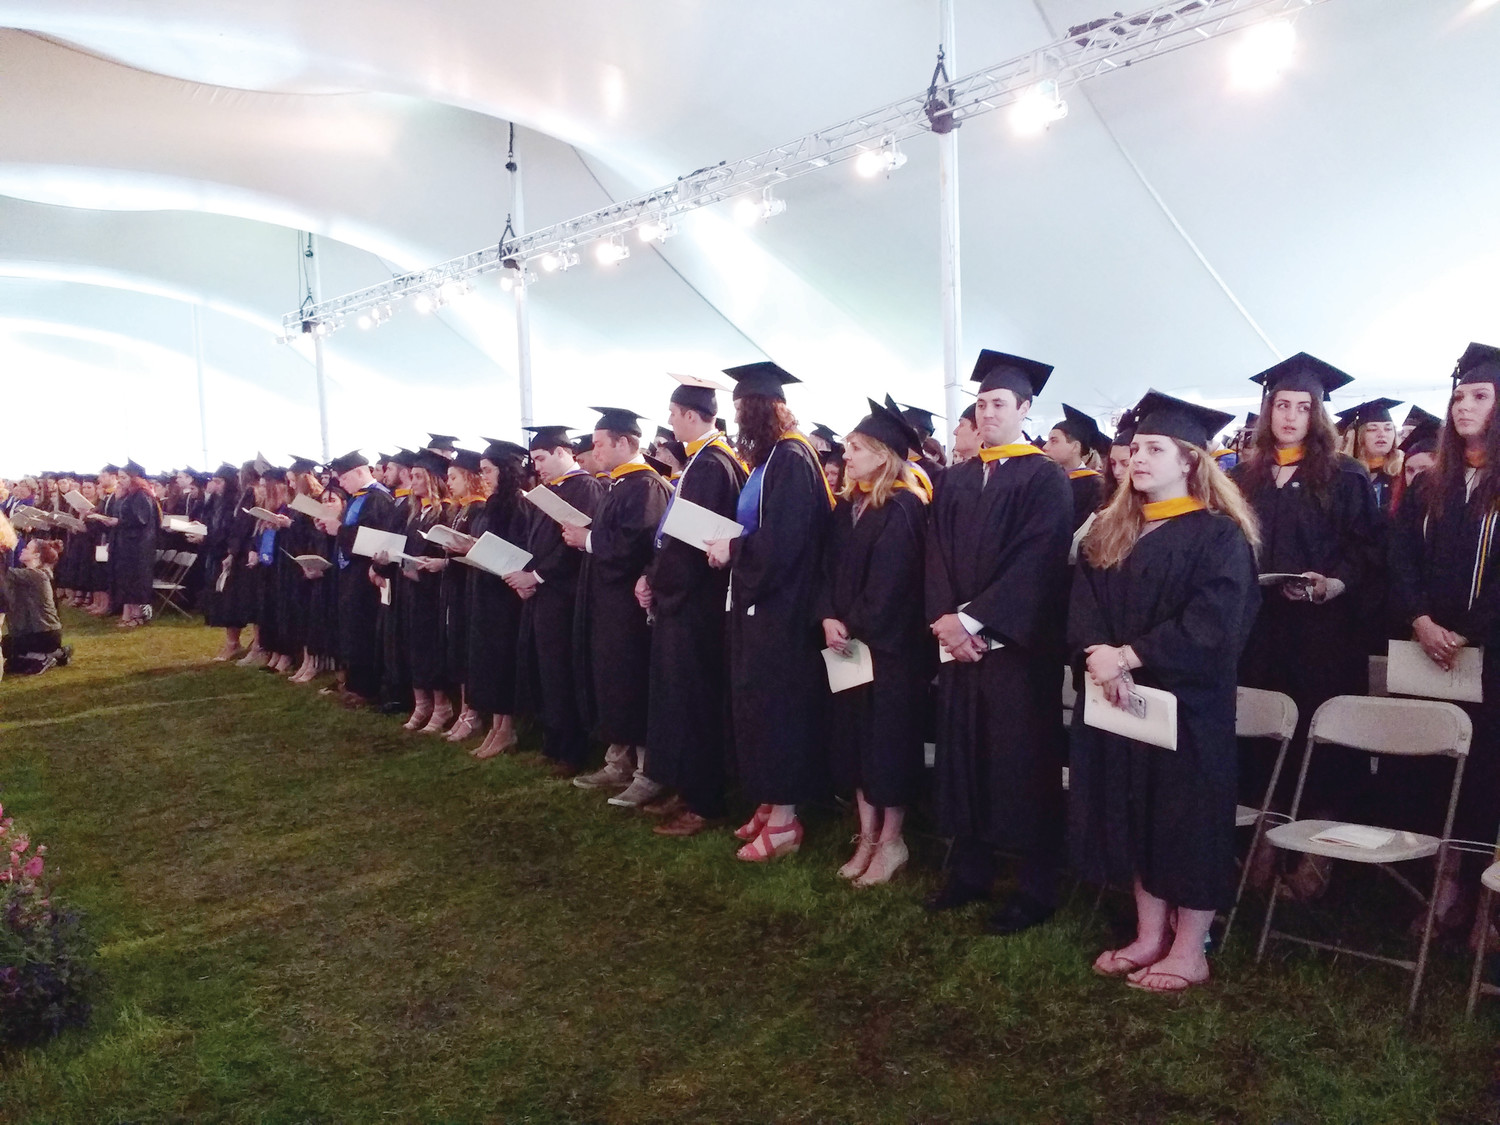 The Salve Regina University Class of 2018 take part in their commencement on Sunday, May 20.